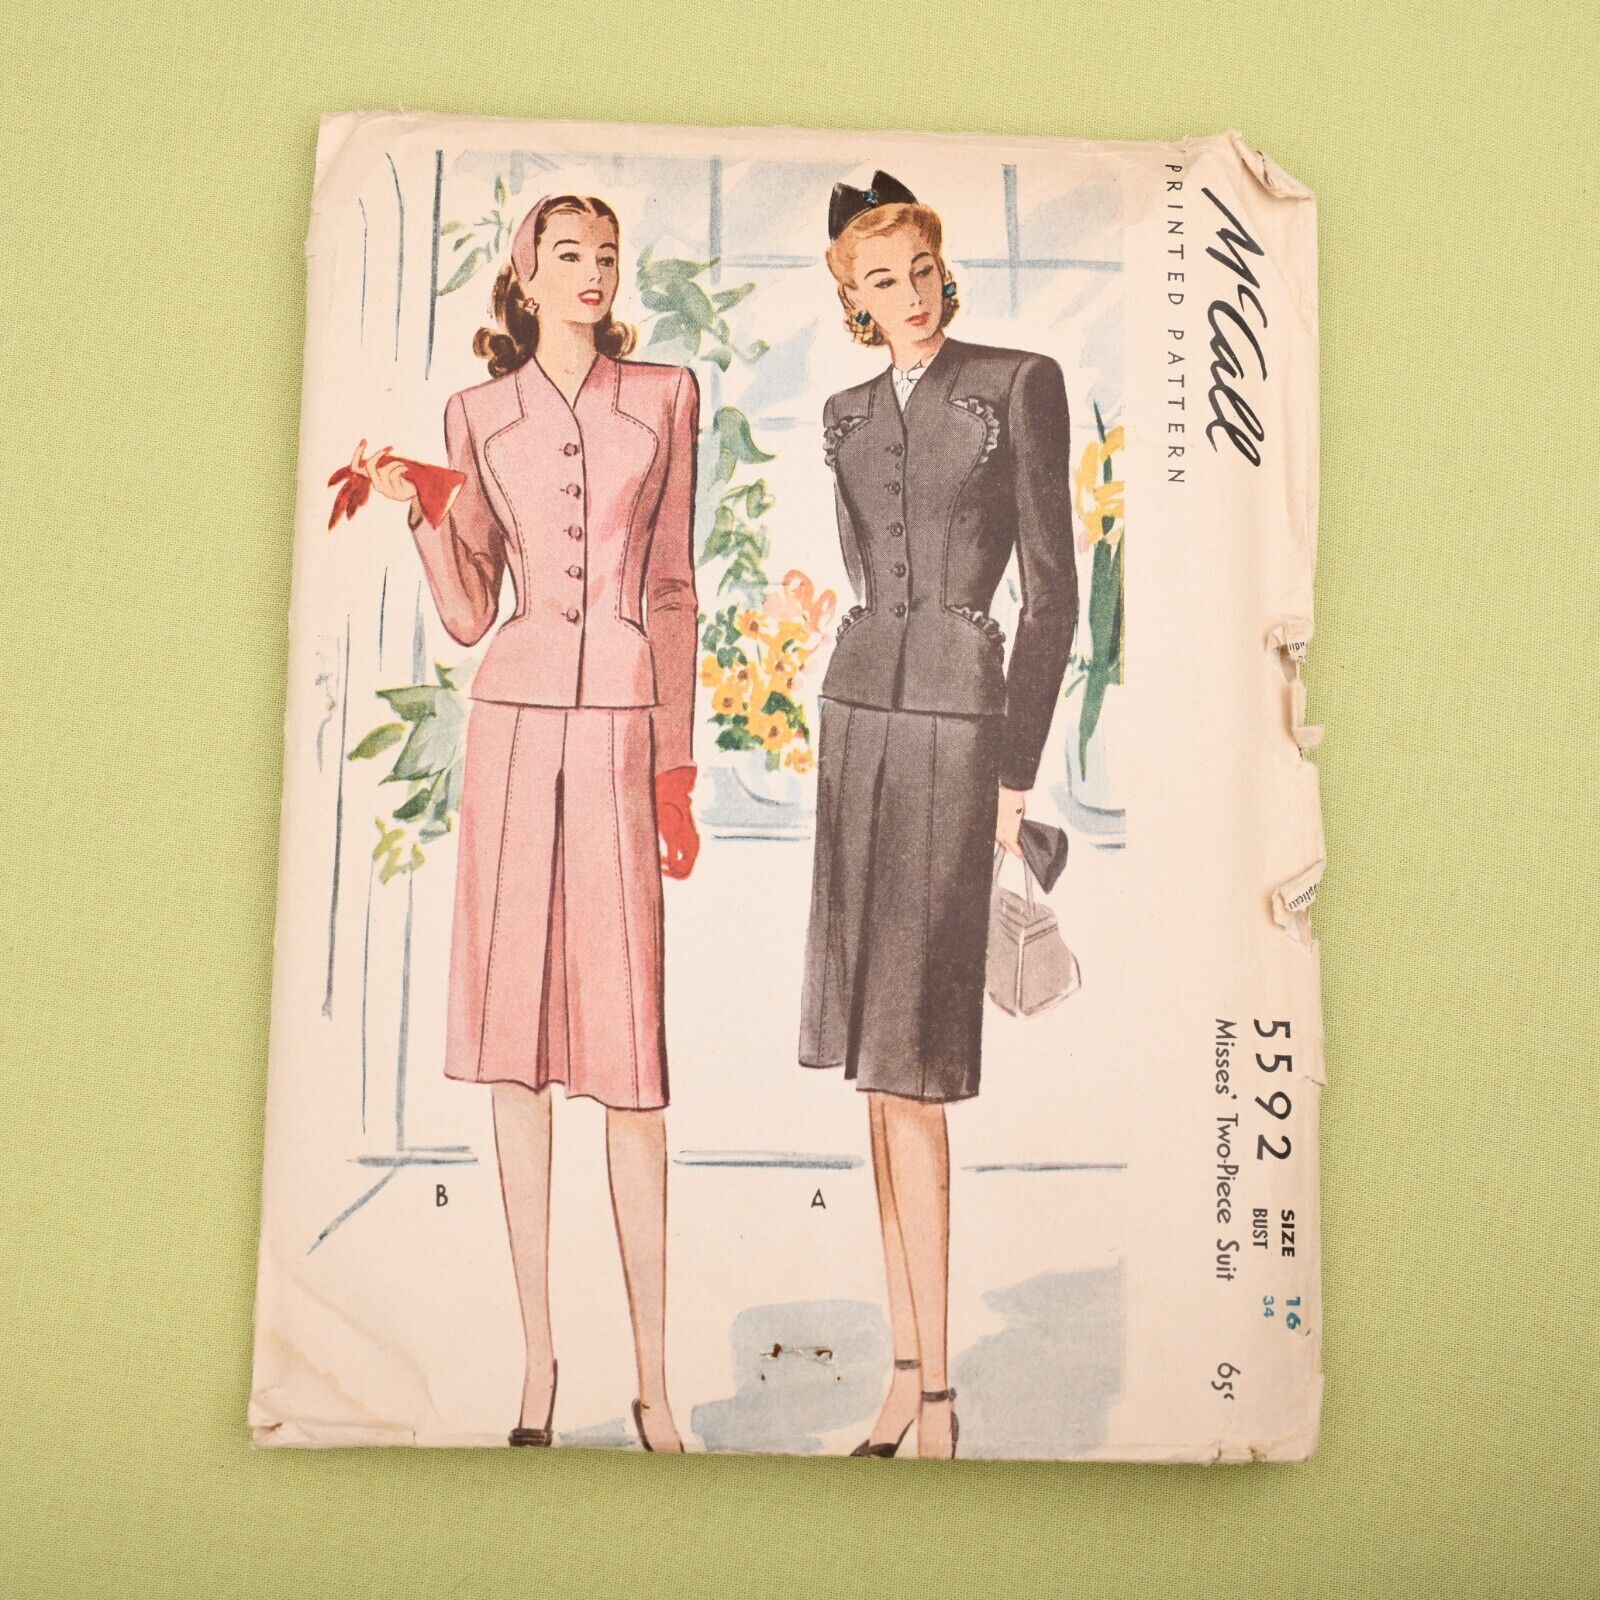 Vintage 1940s McCall Skirt Suit Sewing Pattern - 5592 - Bust 34 - Complete